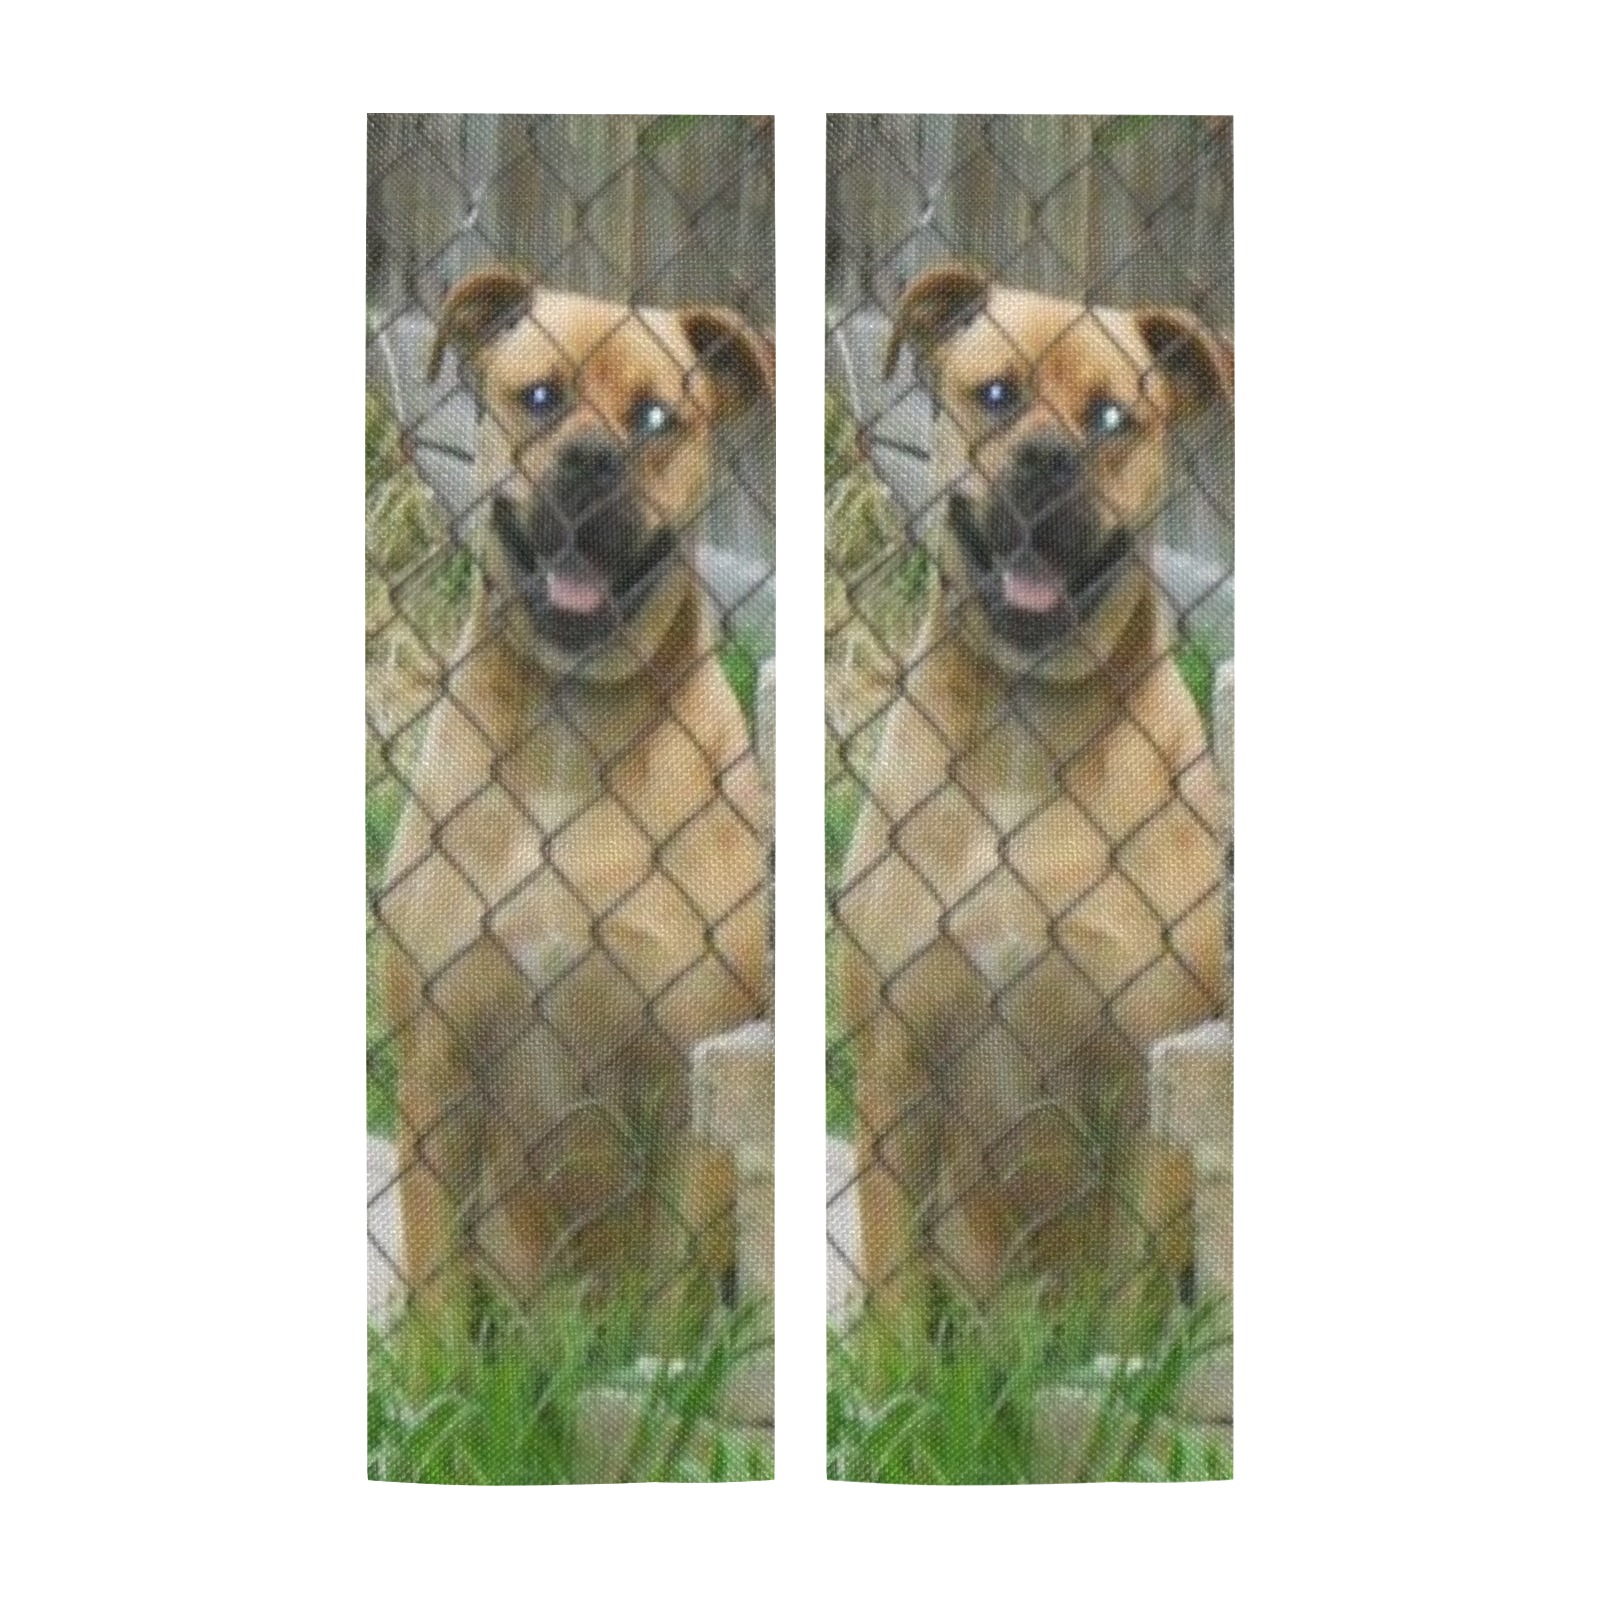 A Smiling Dog Door Curtain Tapestry